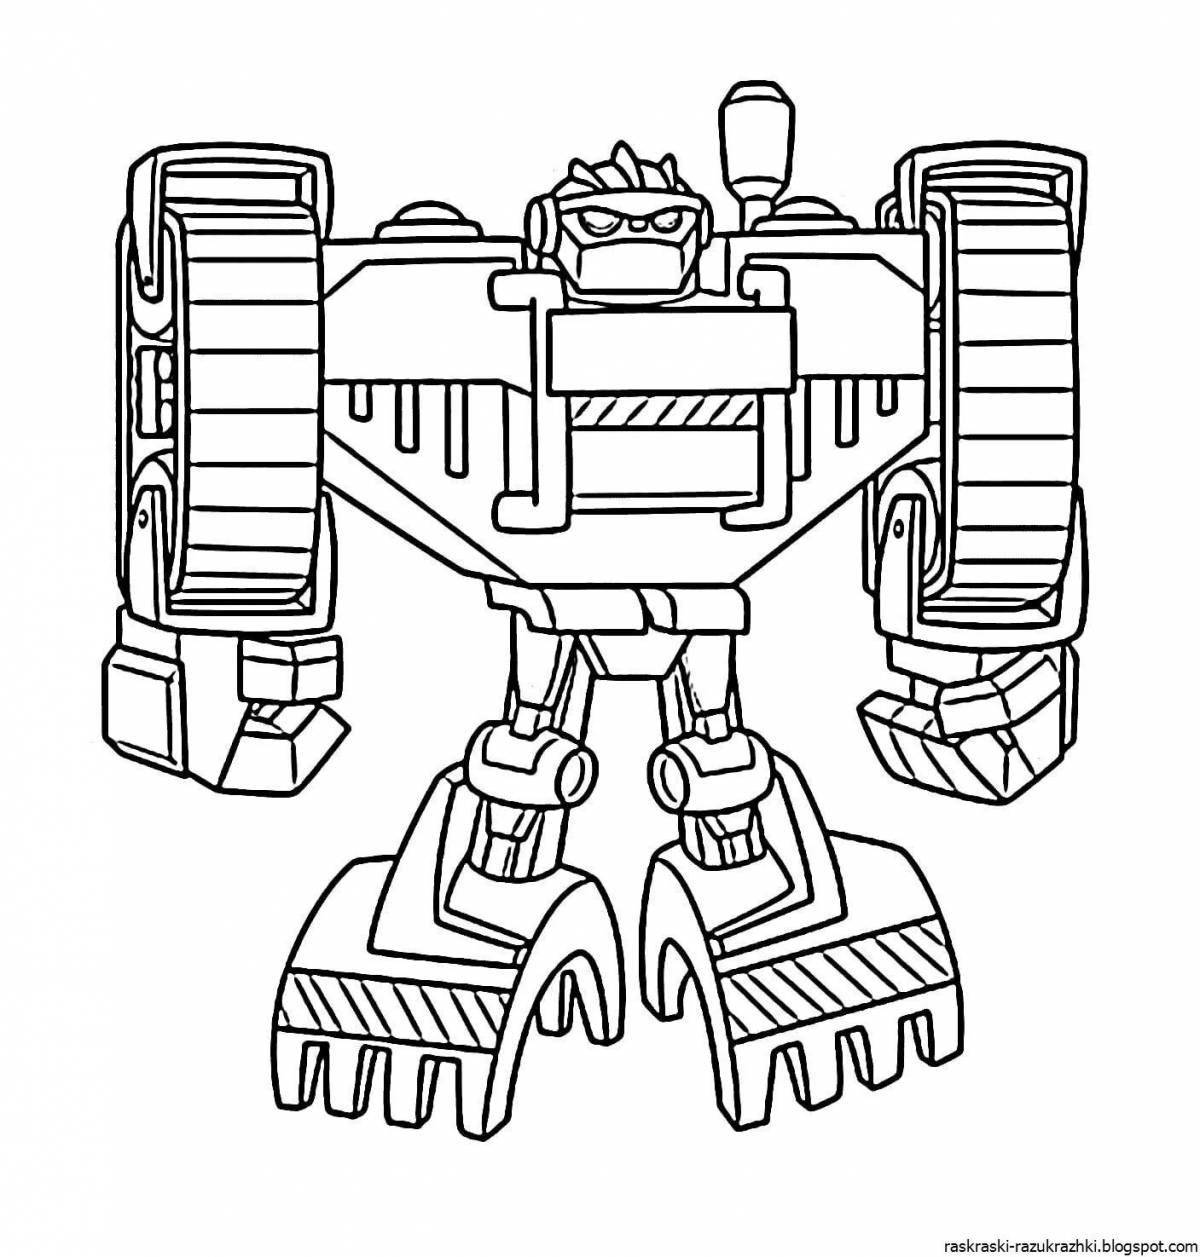 Coloring for bright transformers for children 6-7 years old